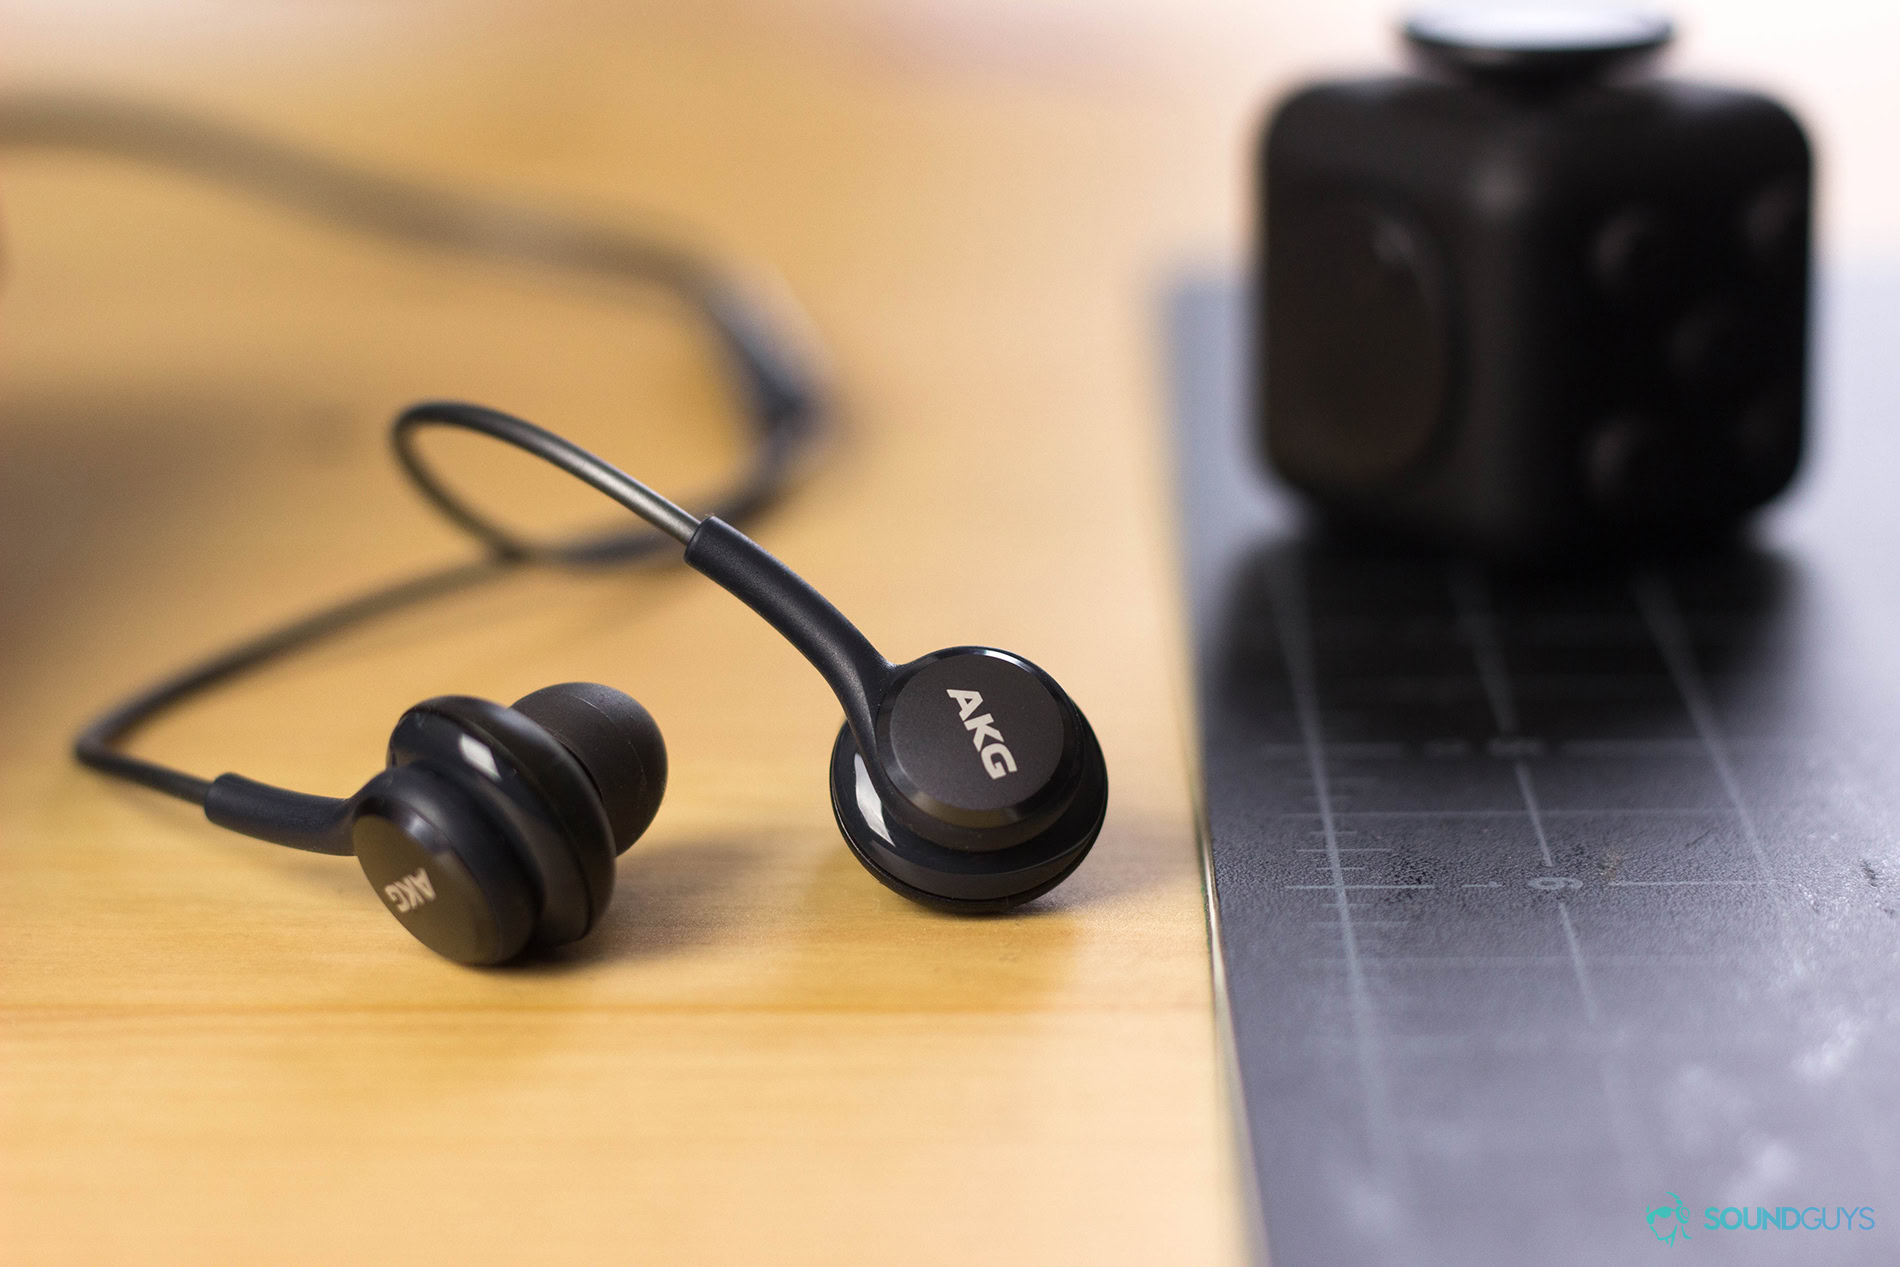 Mobile Audio: AKG earbuds included with Samsung S8.